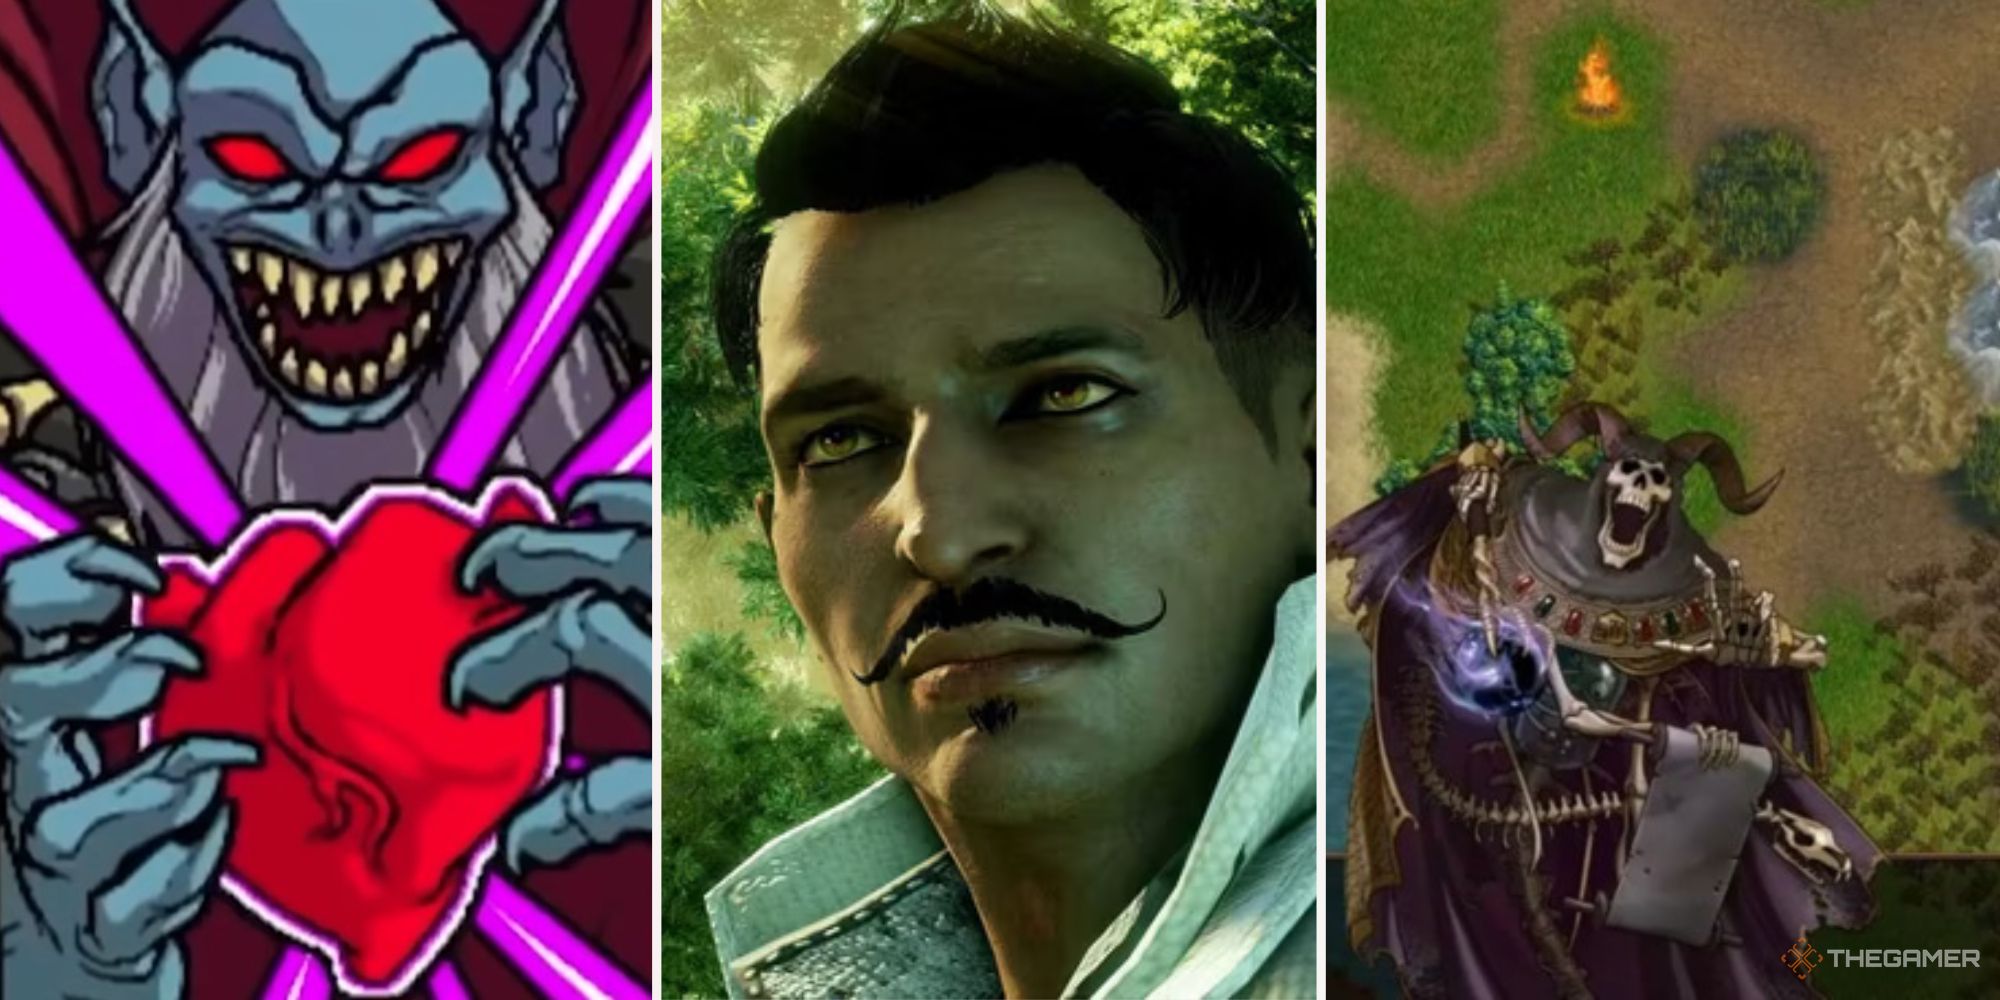 Split image of Necrodancer, Dorian Pavus from Dragon Age, and Lich-Lord Jevyan from Battle of Wesnoth